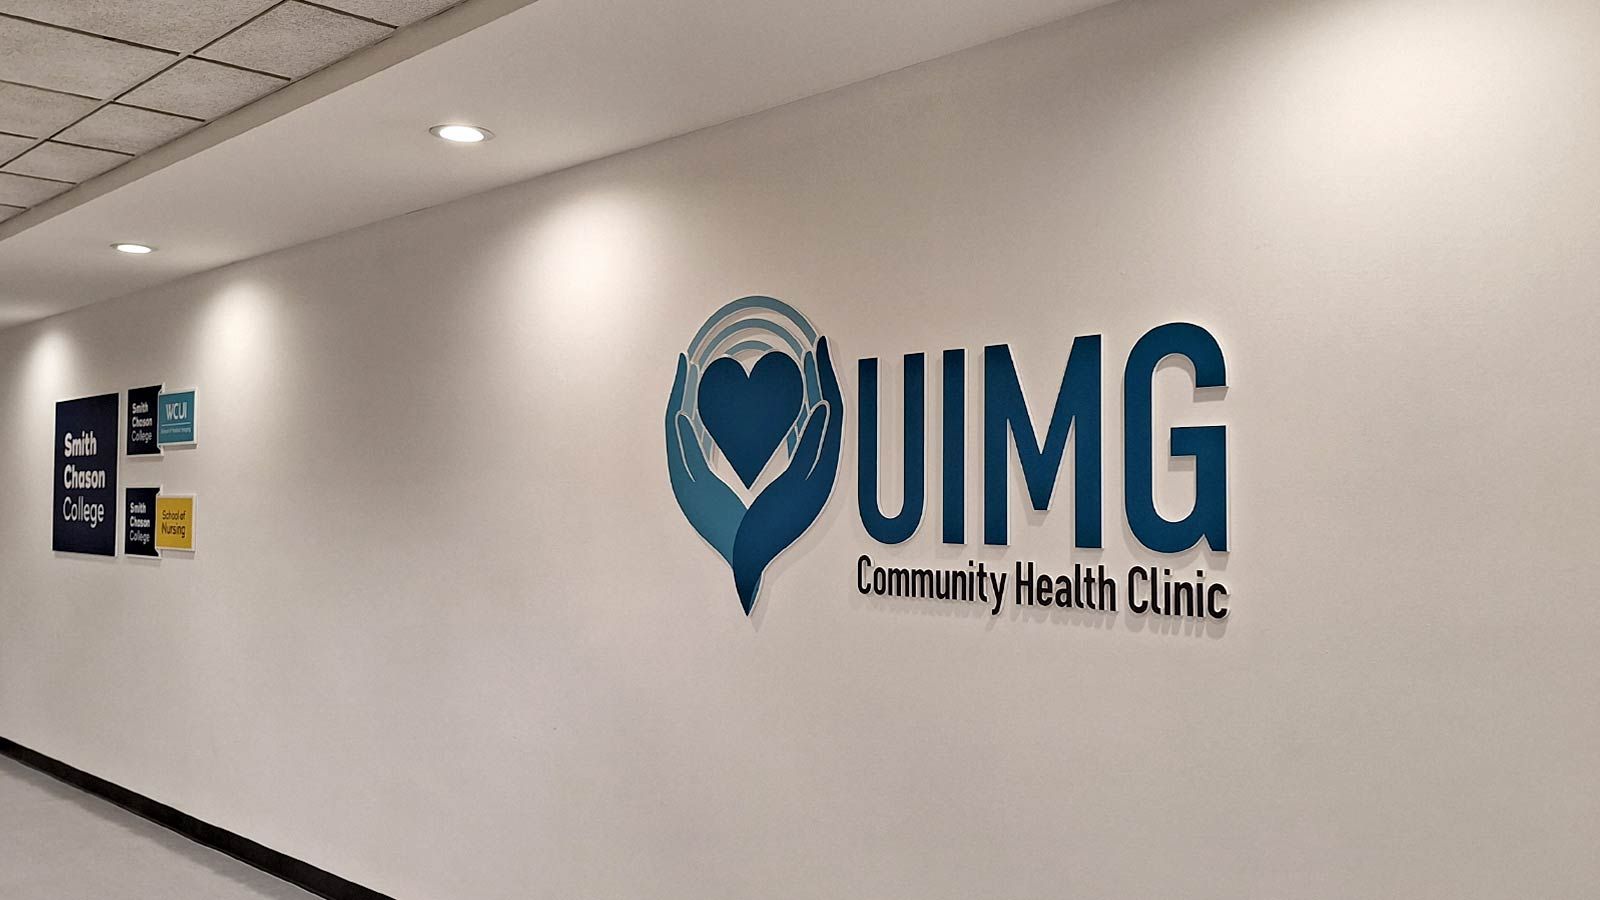 UIMG Community Health Clinic foam core sign on a wall